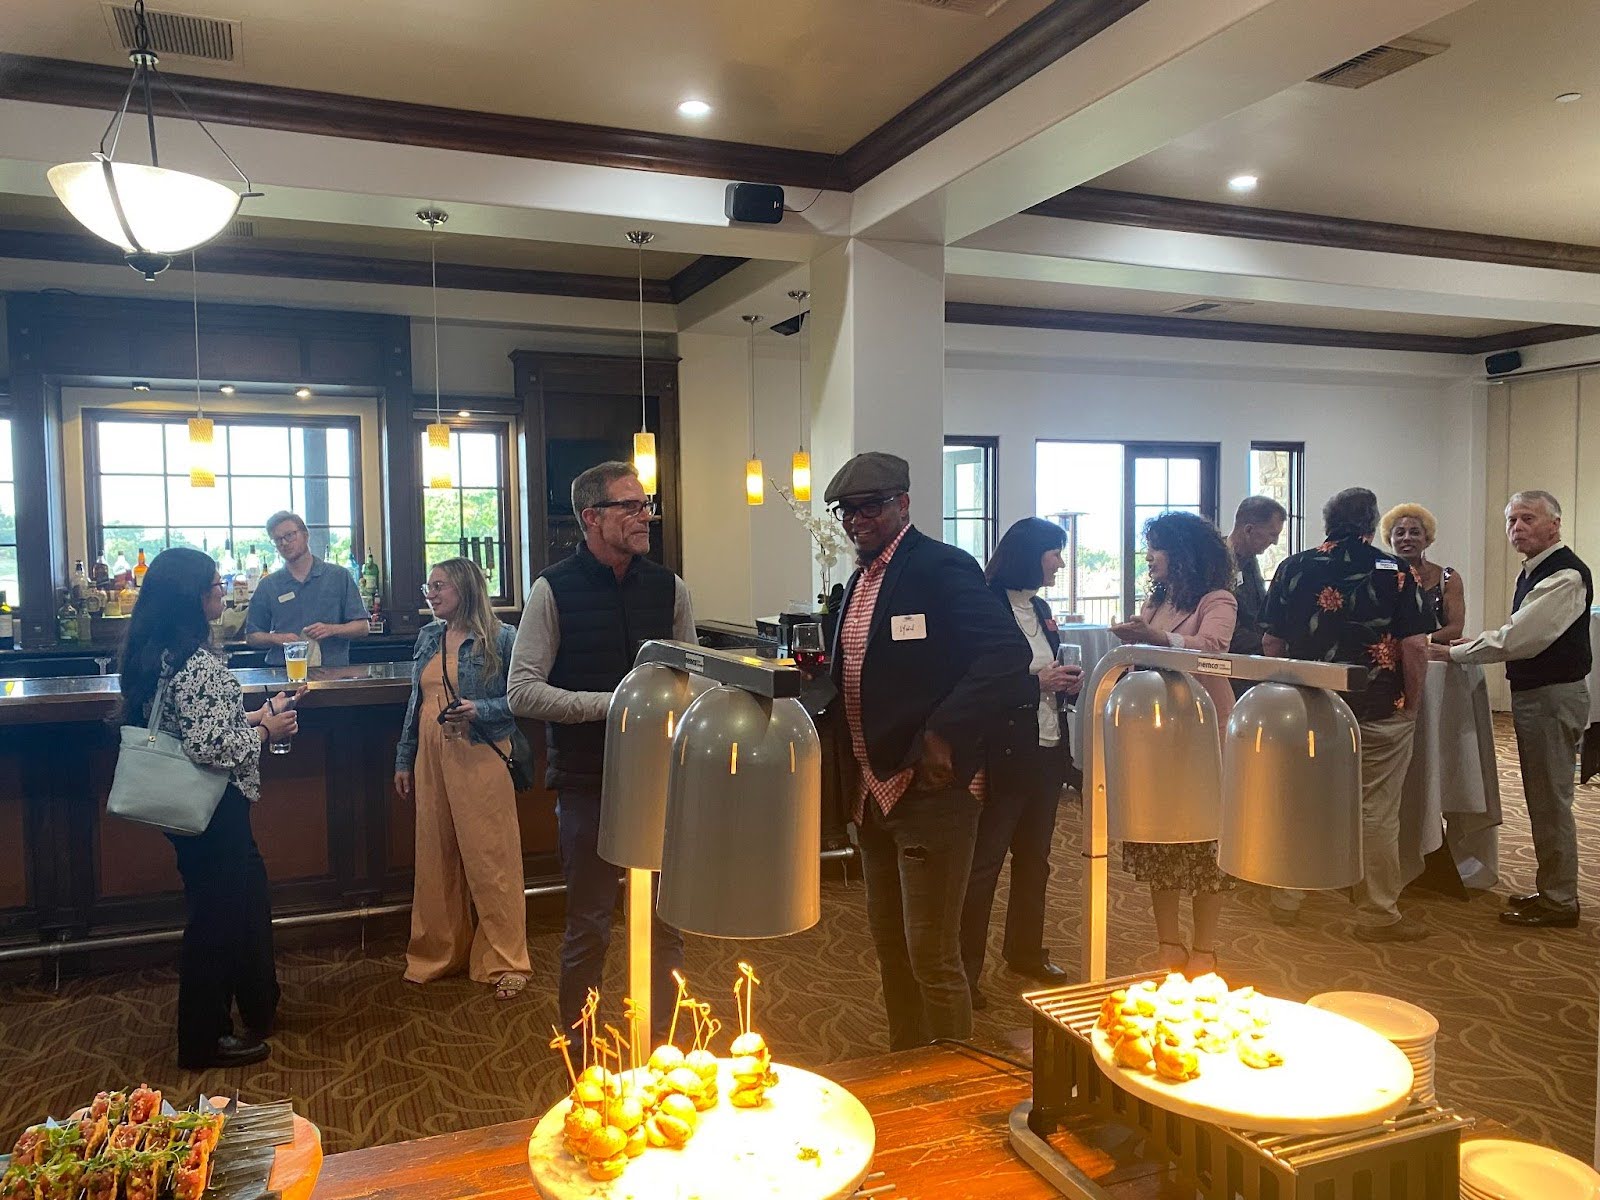 Aliso Viejo Chamber members enjoying good conversation and food at the Aliso Viejo Country Club after hours mixer event.